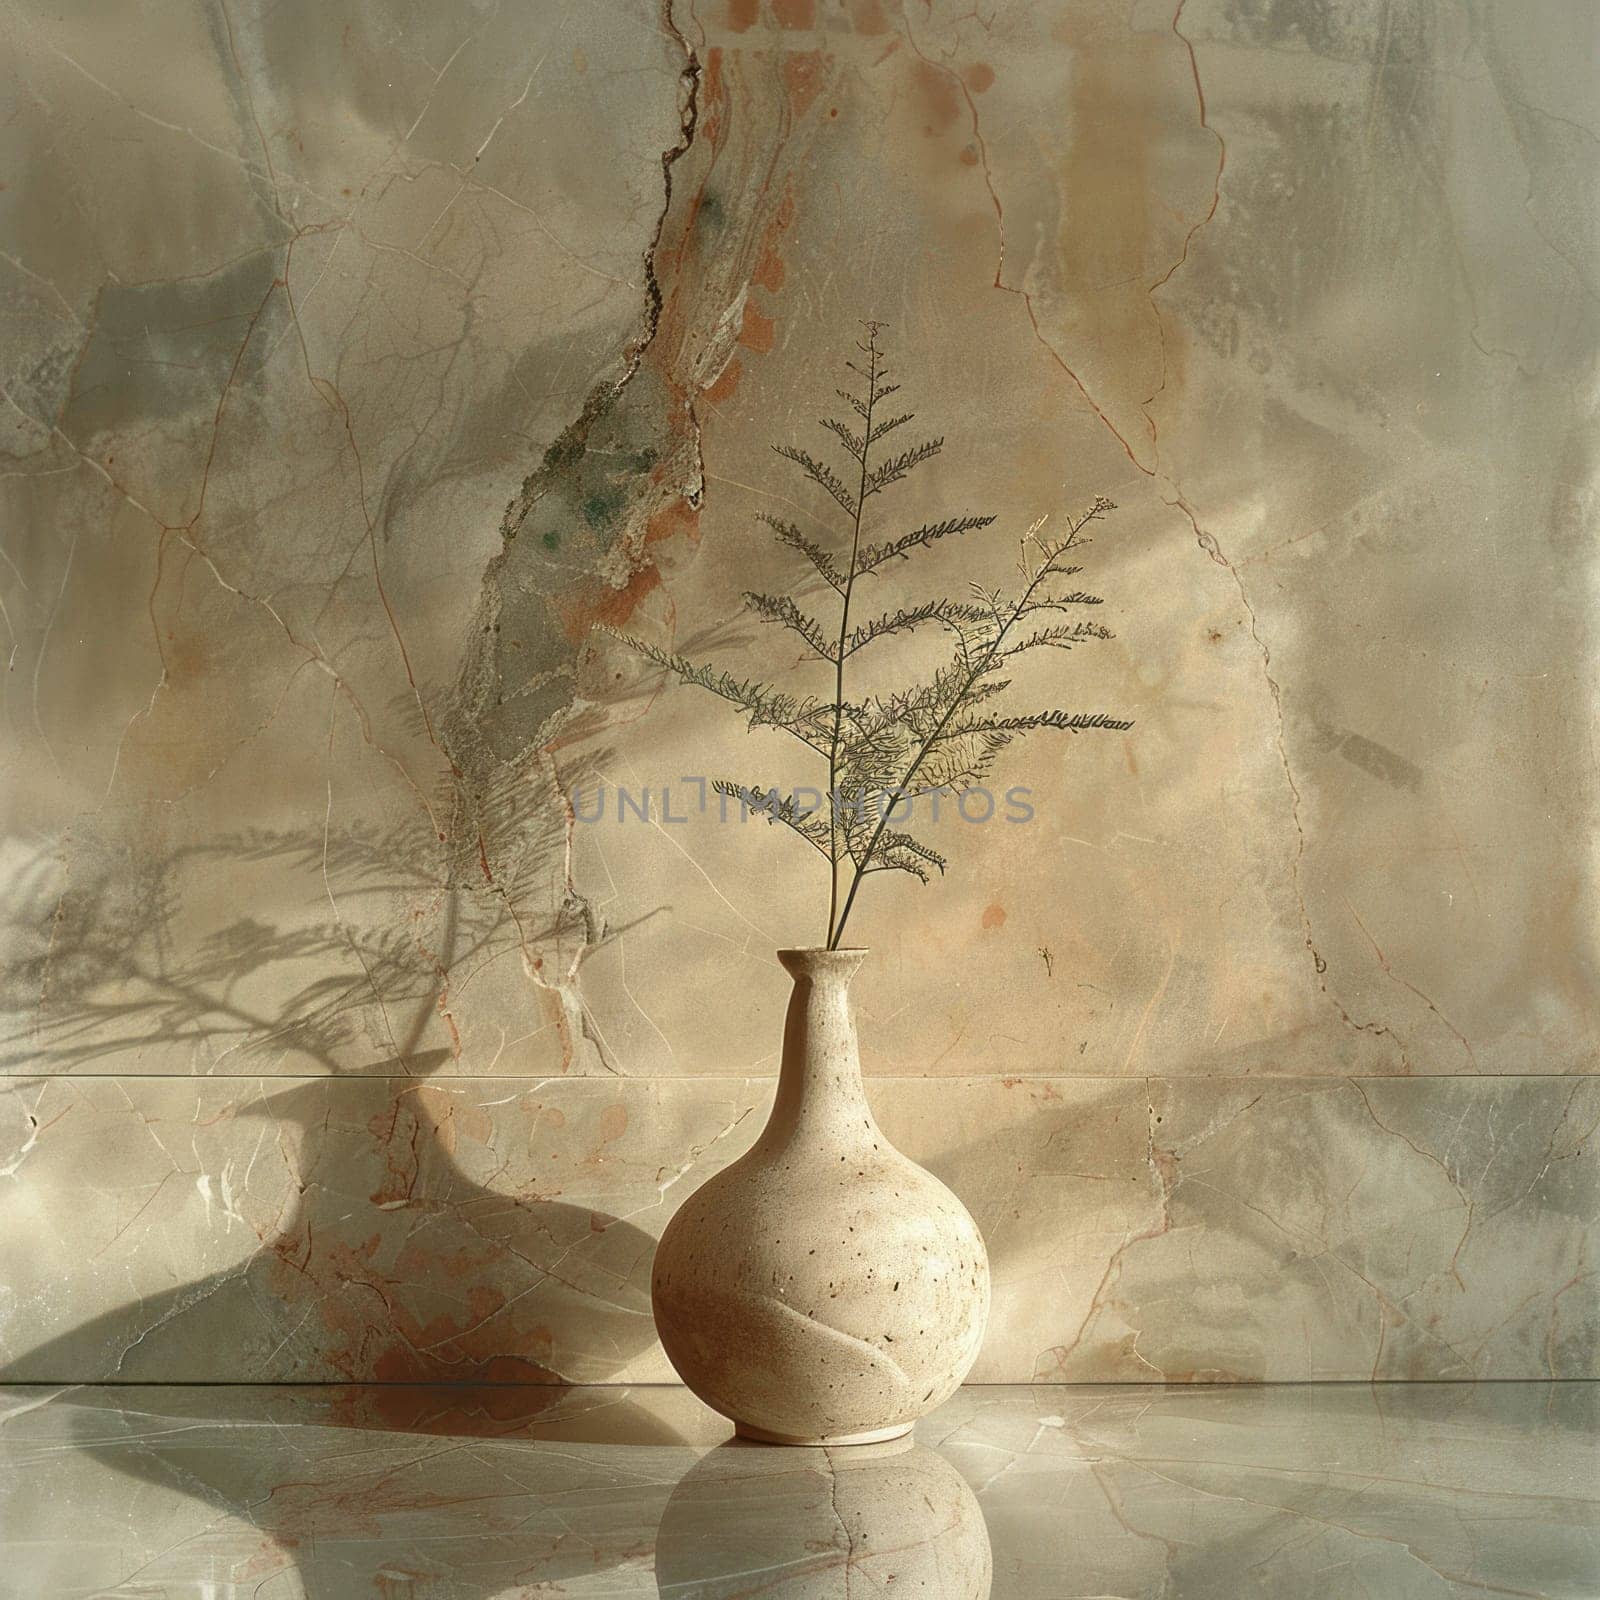 Two Vases on Table by but_photo